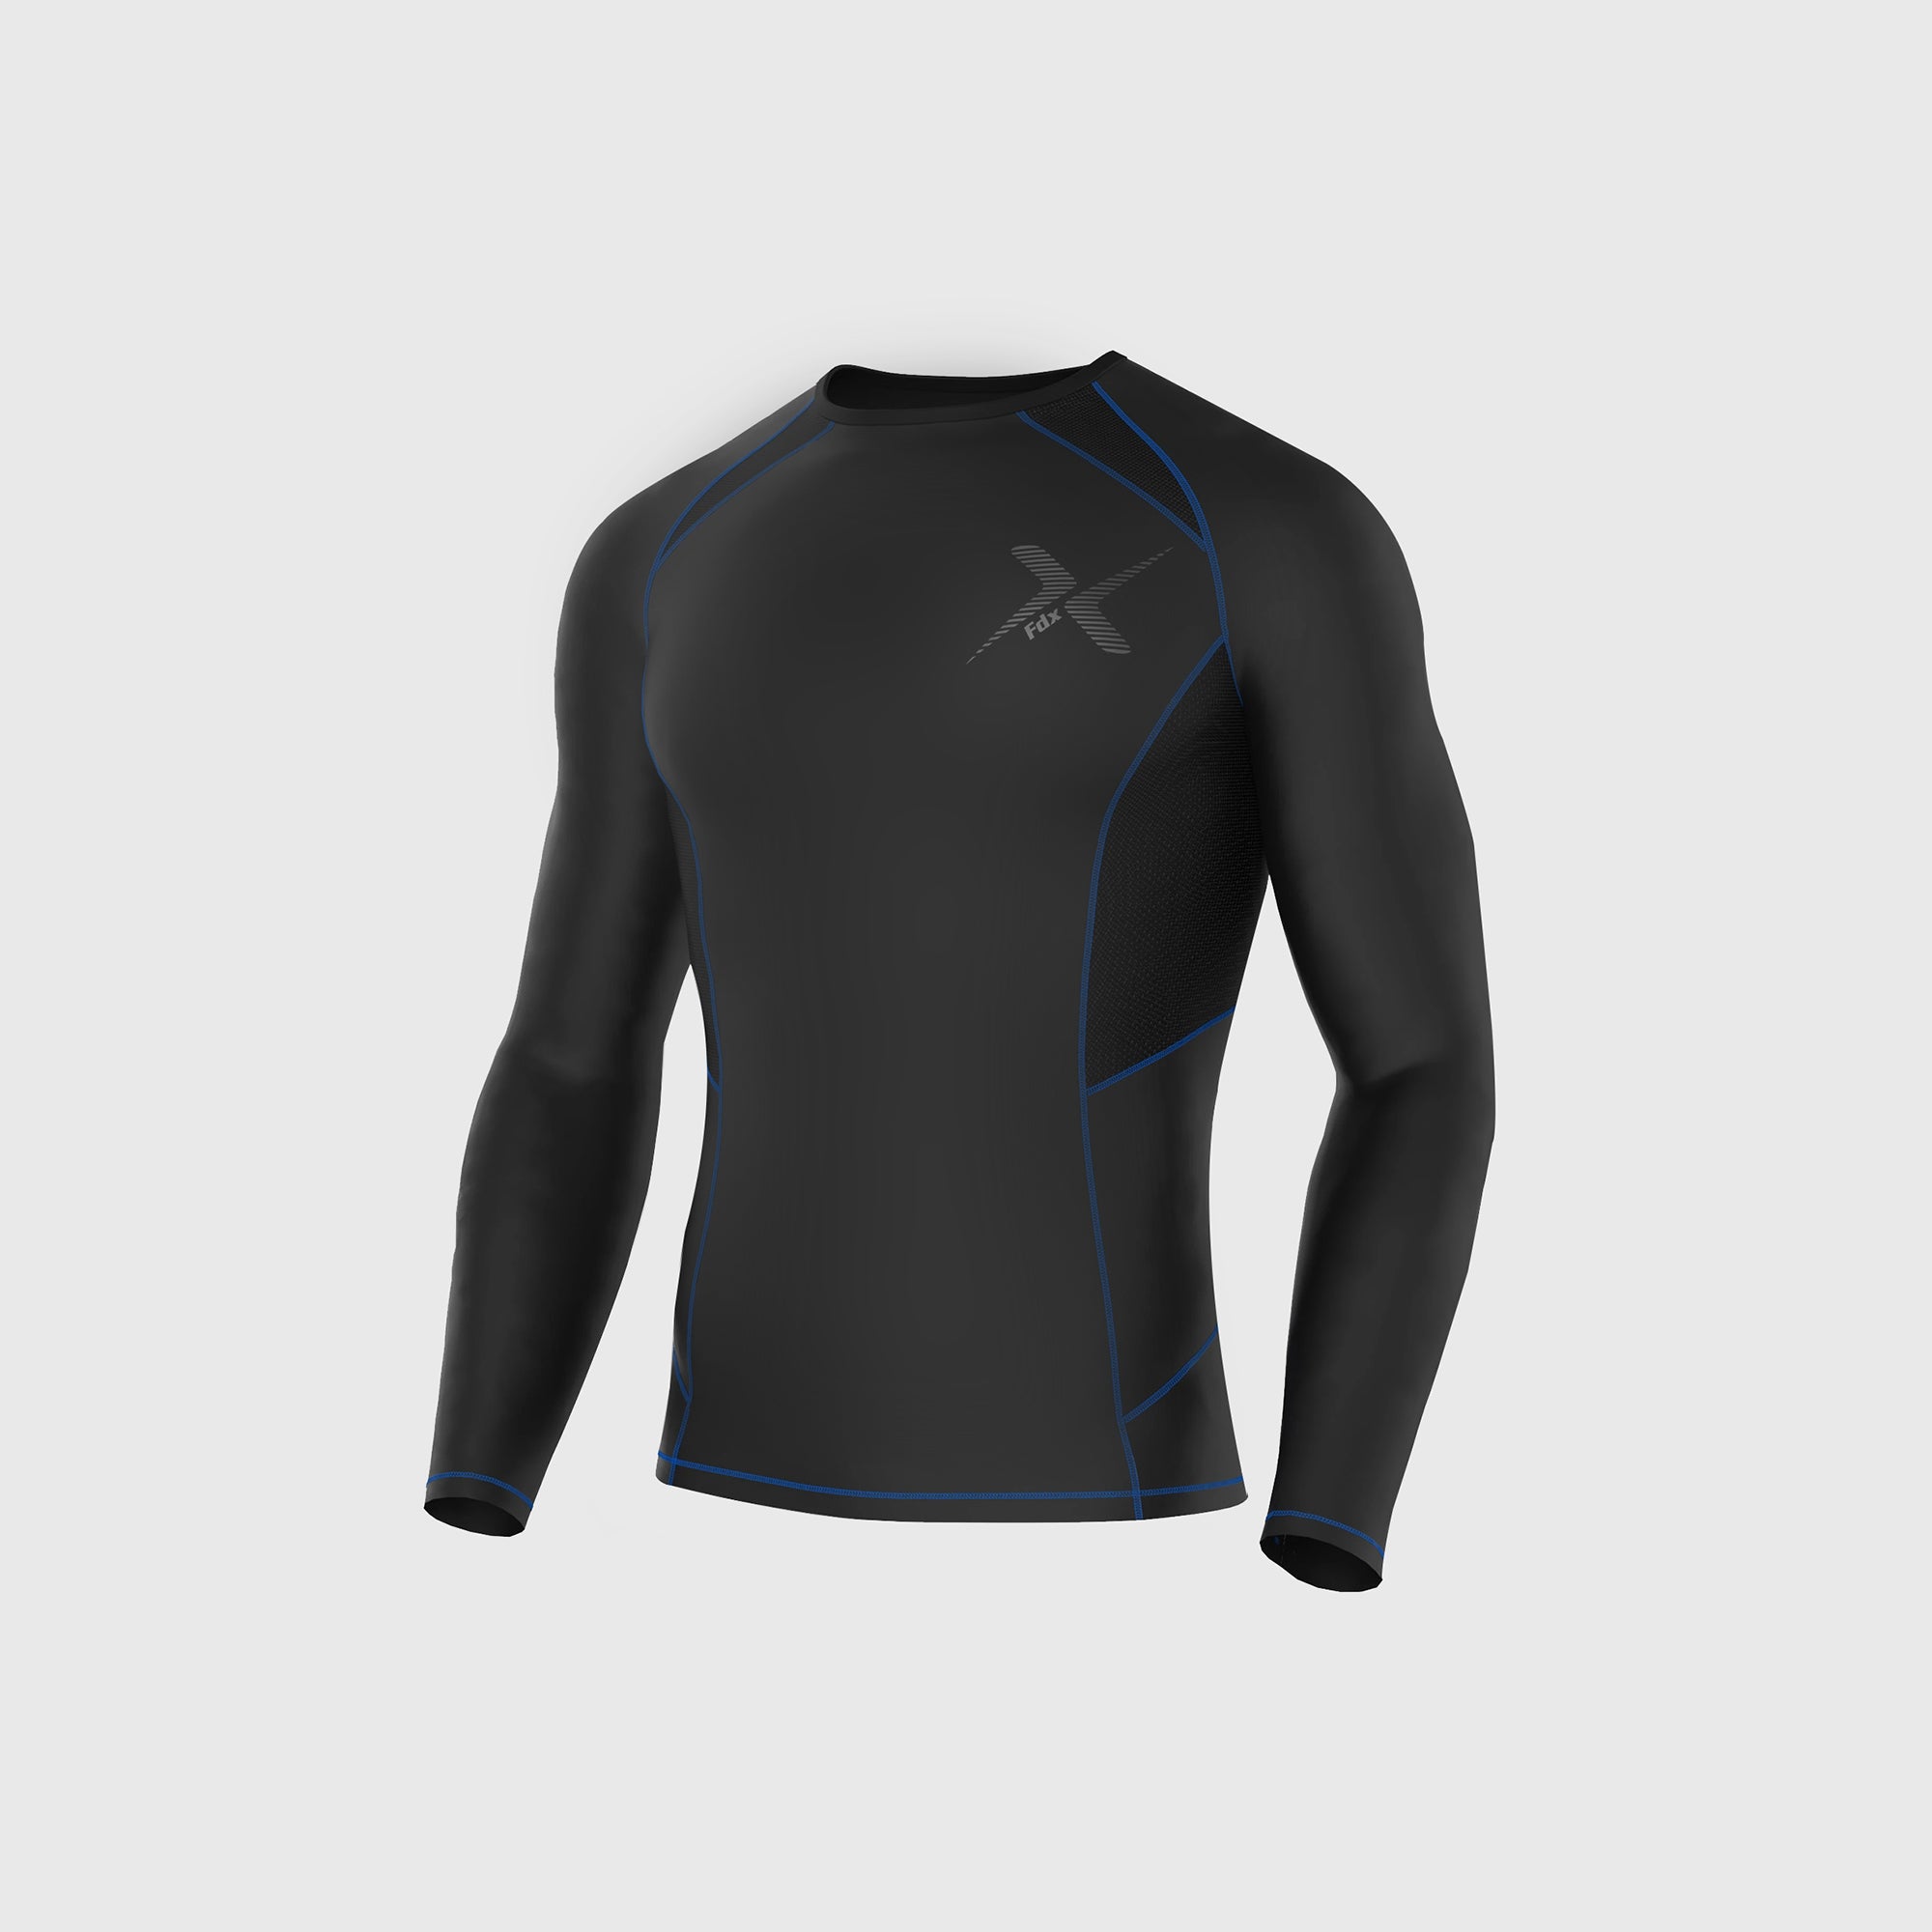 Fdx Mens Black & Blue Long Sleeve Compression Top Running Gym Workout Wear Rash Guard Stretchable Breathable - Recoil